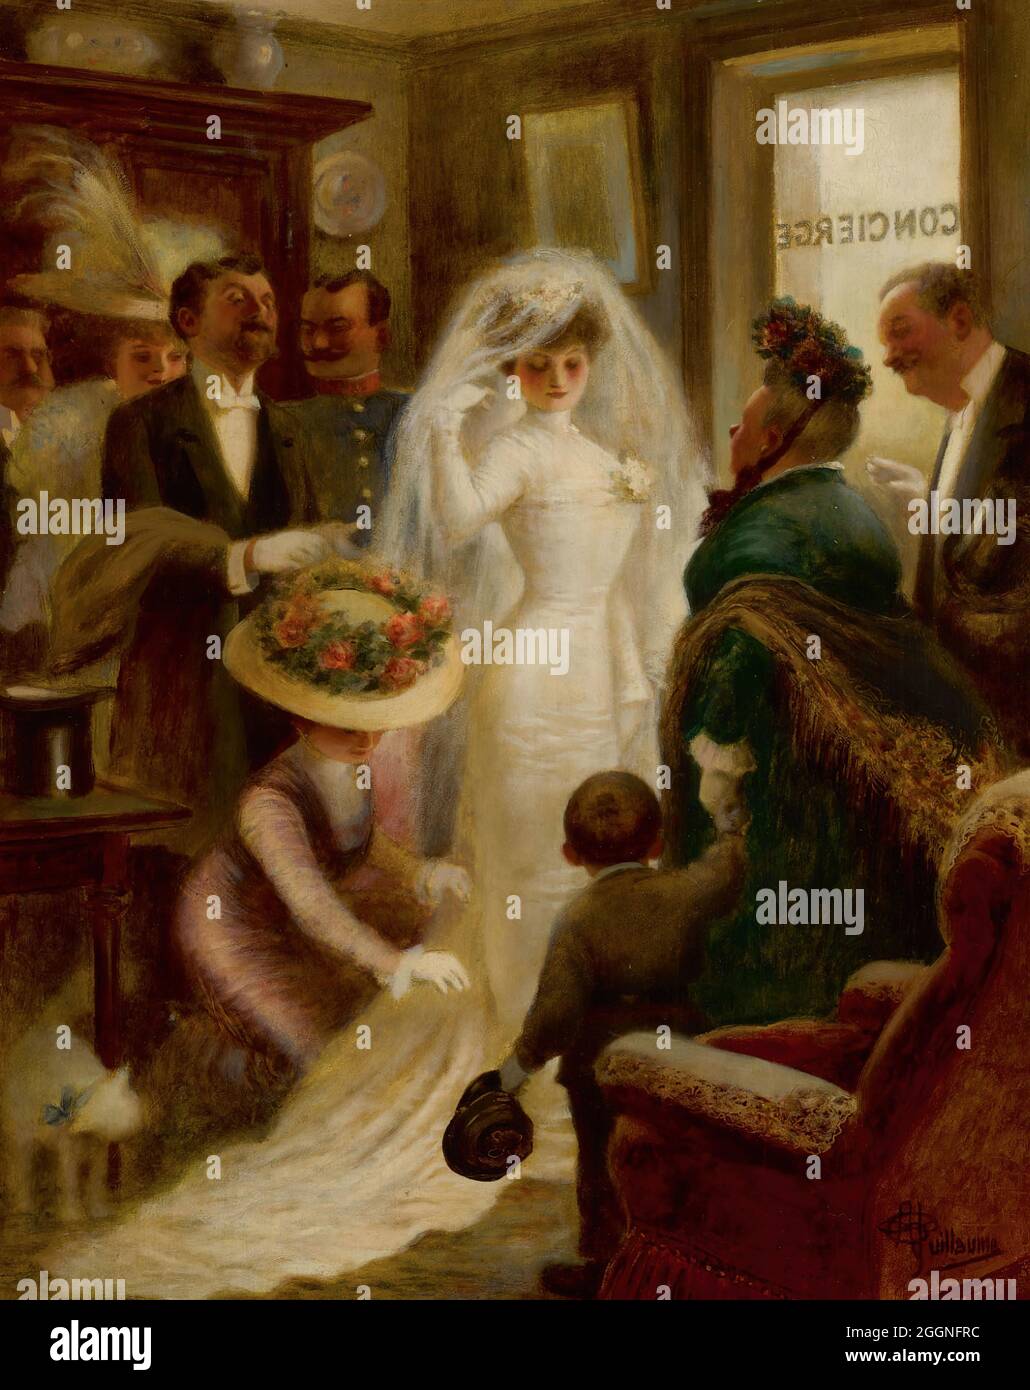 Wedding day (Le jour du mariage). Museum: PRIVATE COLLECTION. Author: ALBERT GUILLAUME. Stock Photo